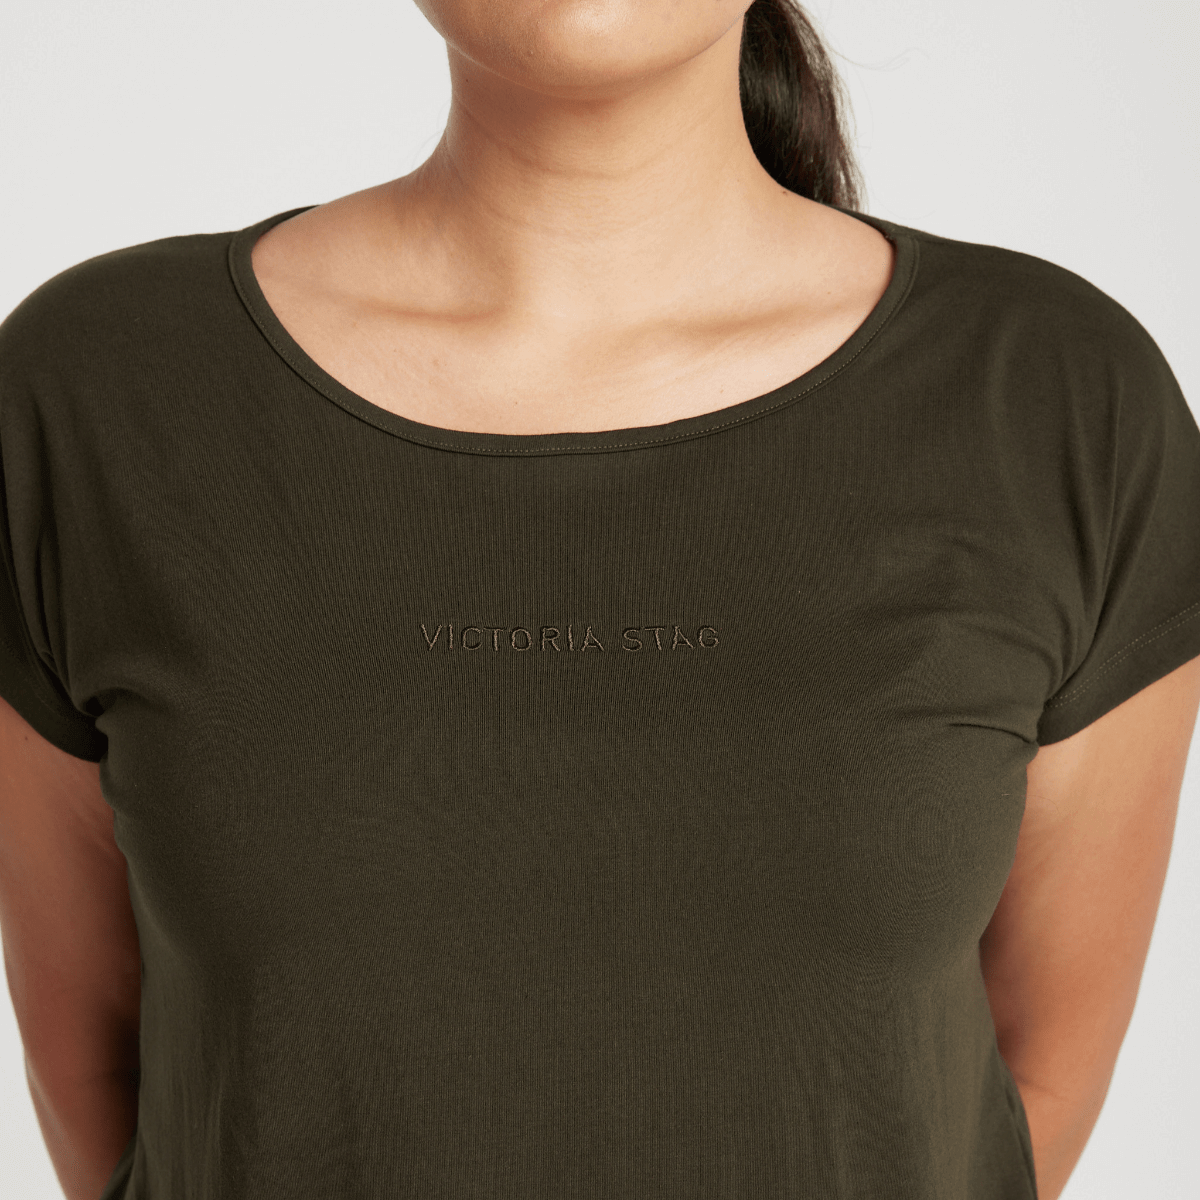 Victoria Stag Core Cap Sleeved Tee in Khaki front closer look